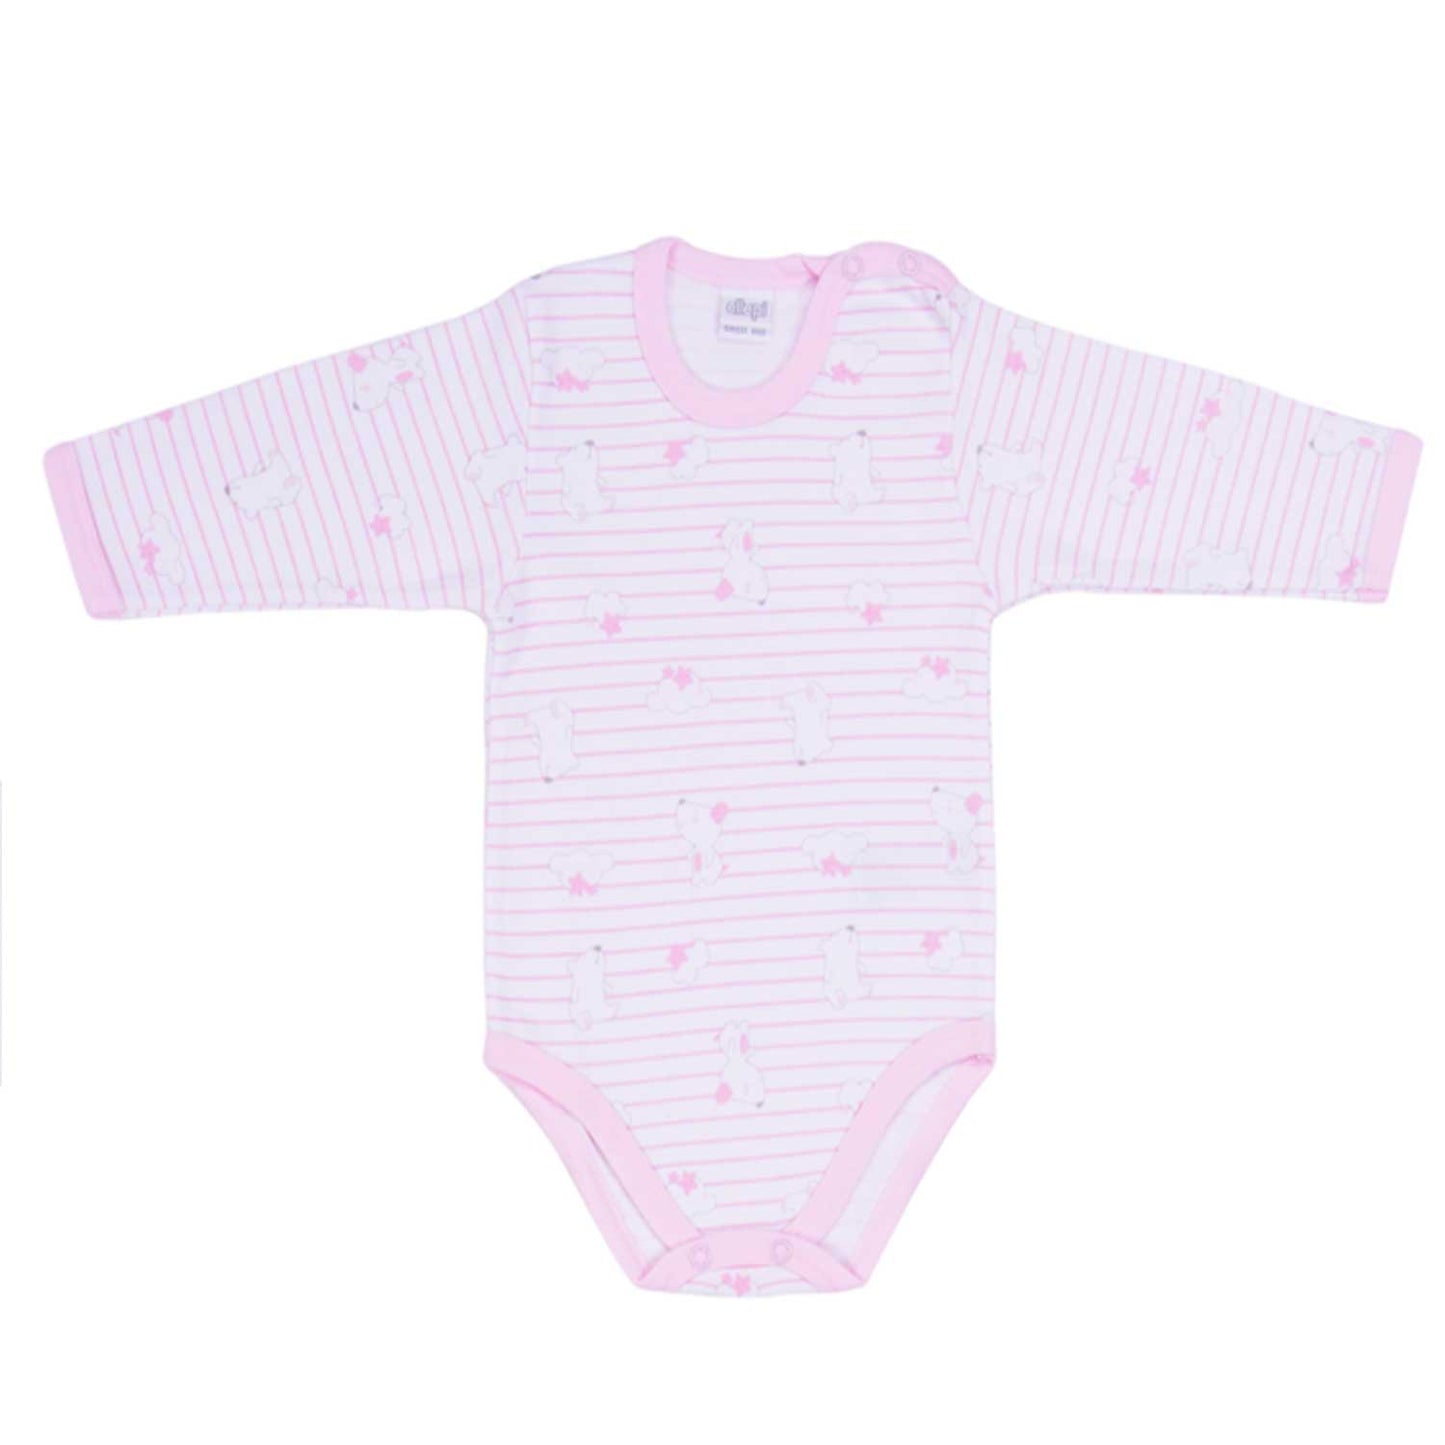 Ellepi - 2 Bodysuits with opening on the shoulder and long sleeves, 100% pink cotton